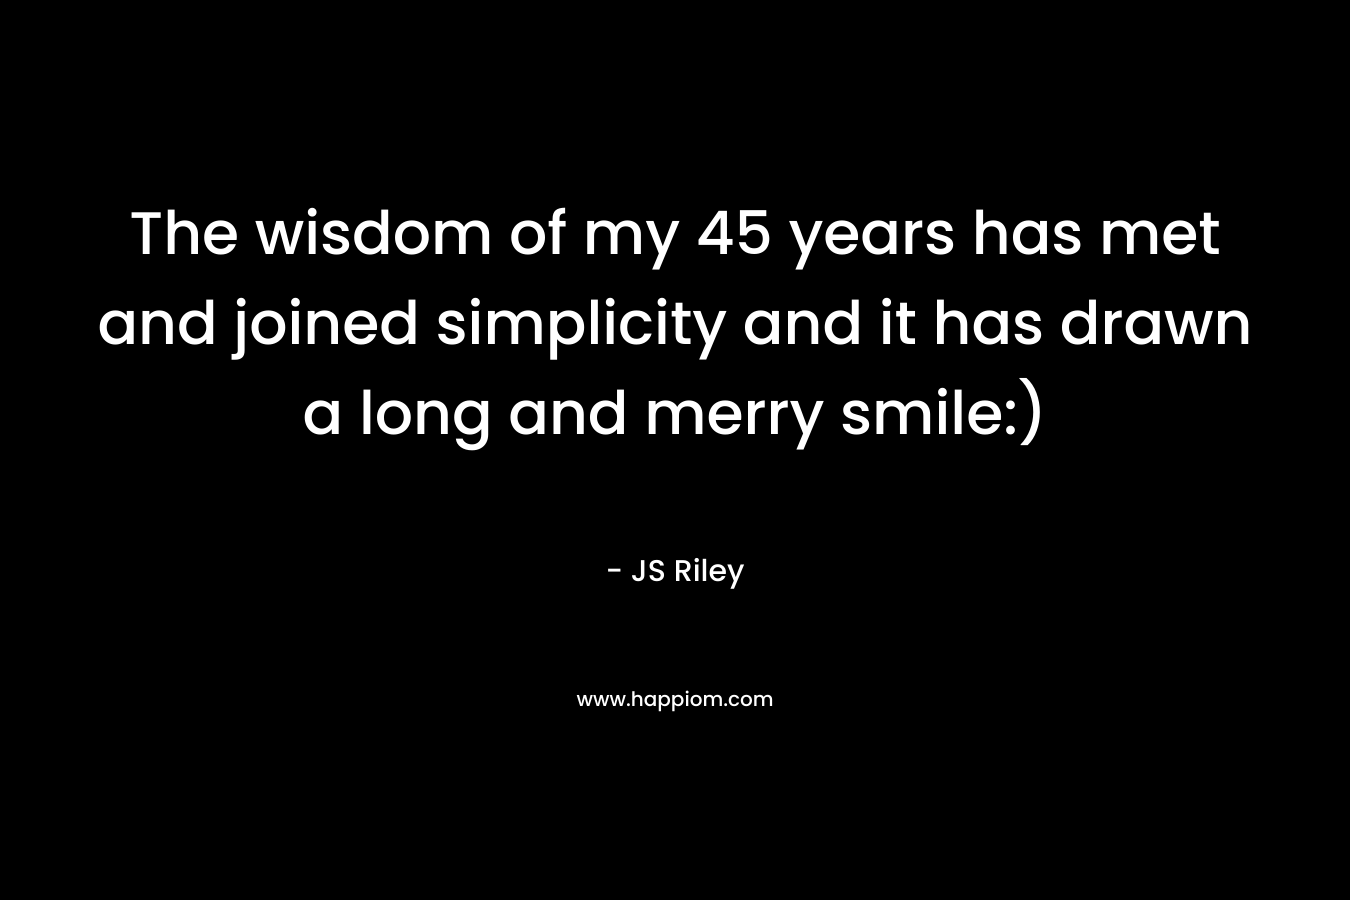 The wisdom of my 45 years has met and joined simplicity and it has drawn a long and merry smile:) – JS Riley